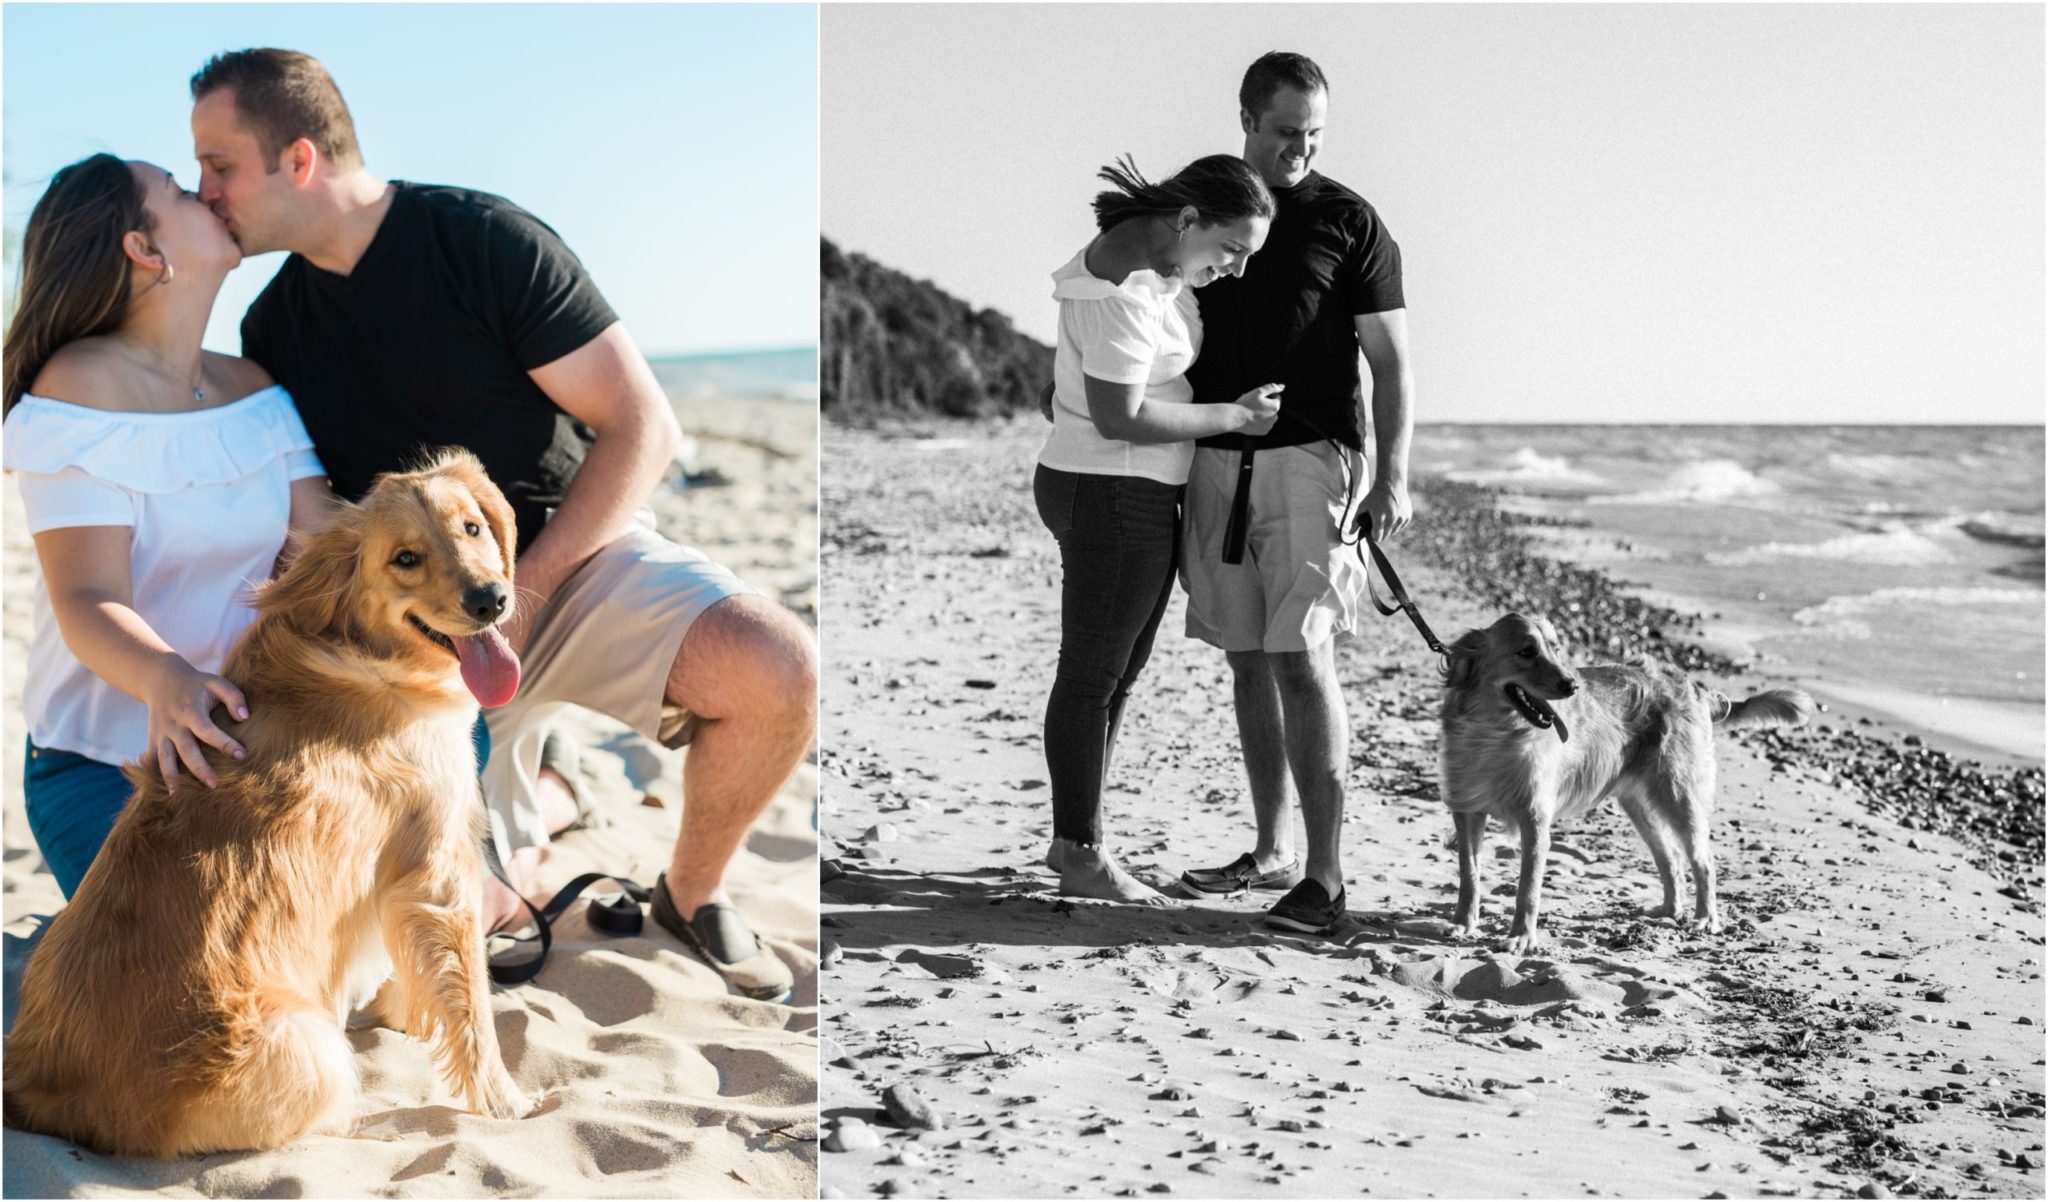 Collage image of a couple kissing on the beach while holding their dog.